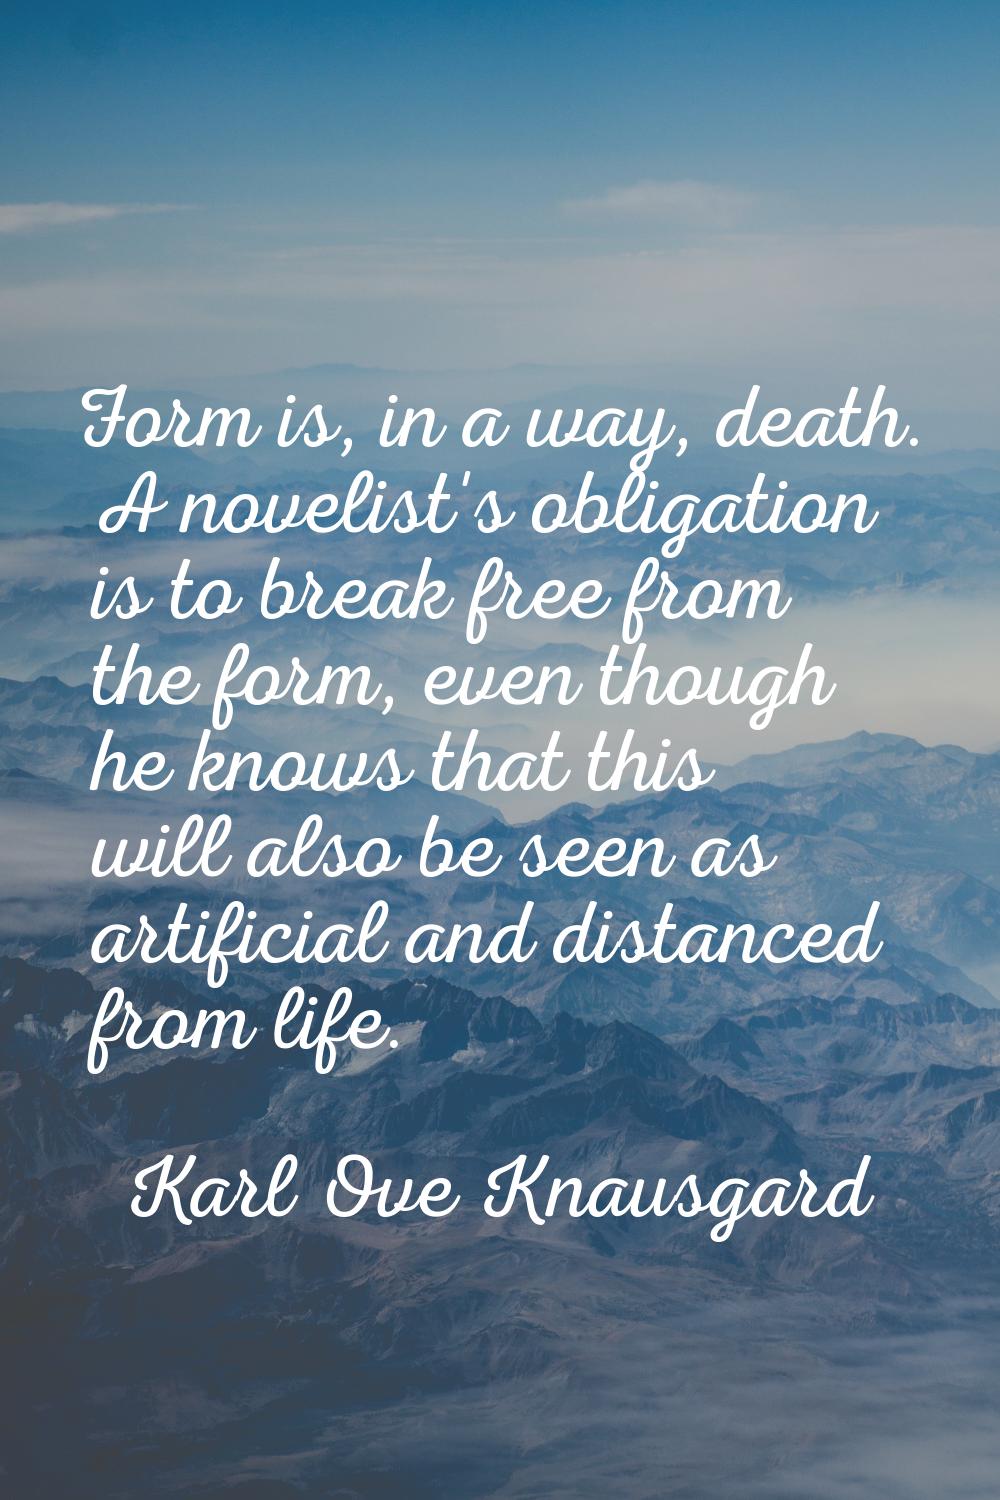 Form is, in a way, death. A novelist's obligation is to break free from the form, even though he kn